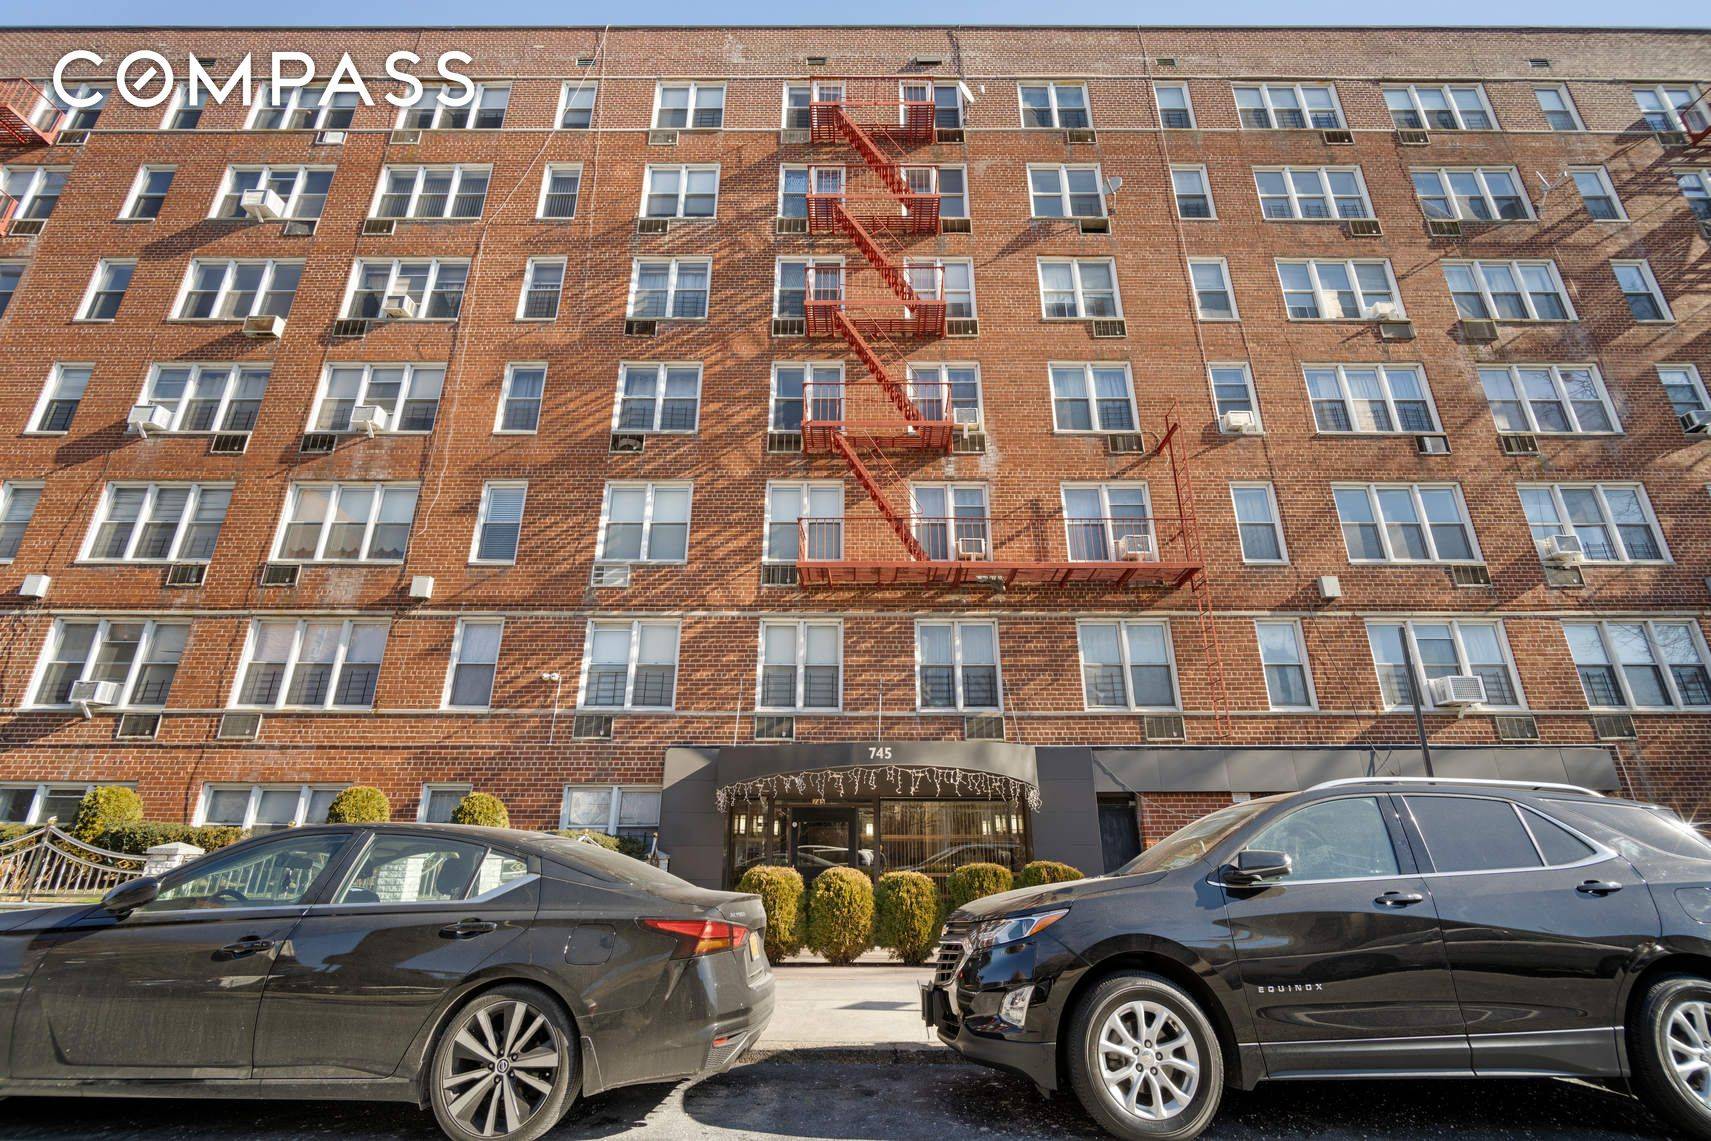 We have an enormous super sunny two bedroom, convertible three bedroom apartment available in a post war elevator building in the College Meadows section of Flatbush.